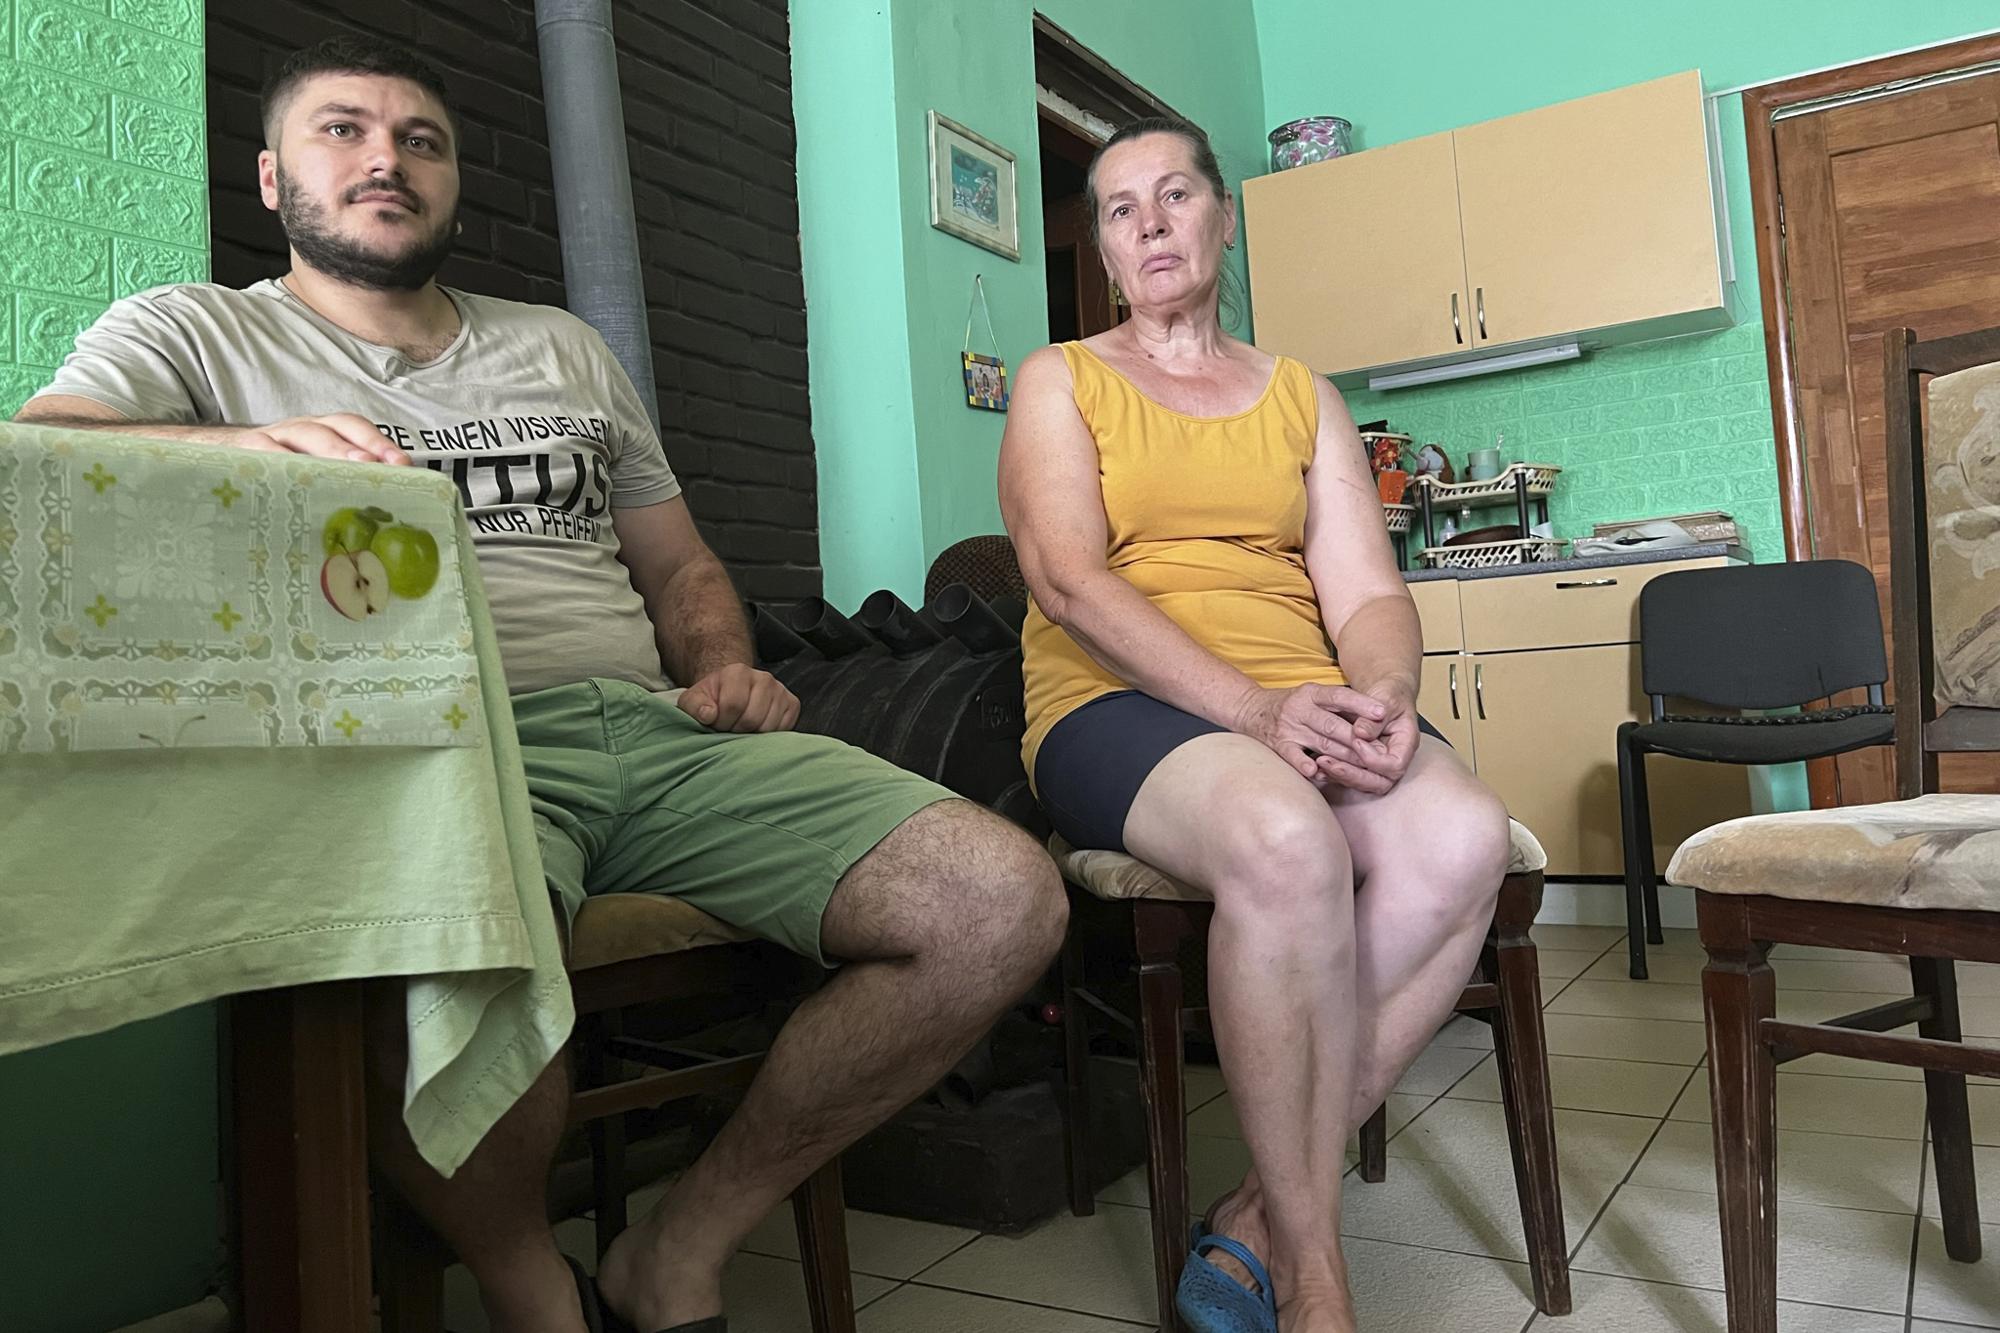 Andrii Shkoliar, left, and his mother-in-law, Natalia Savenko, sit in their home in Zdvyzhivka, Ukraine on Aug. 1, 2022. On March 18, Shkoliar and his wife were walking nearby to a relative's house when a dark-colored UAZ Patriot sped past, stopped abruptly and drove back to them. A soldier who appeared to be of higher rank stepped out of the Russian-made SUV, demanding to know why they'd broken curfew. "He told me: "I give you one hour back and forth, otherwise you'll be like this one in the car," Shkoliar recalled. (AP Photo/Erika Kinetz)